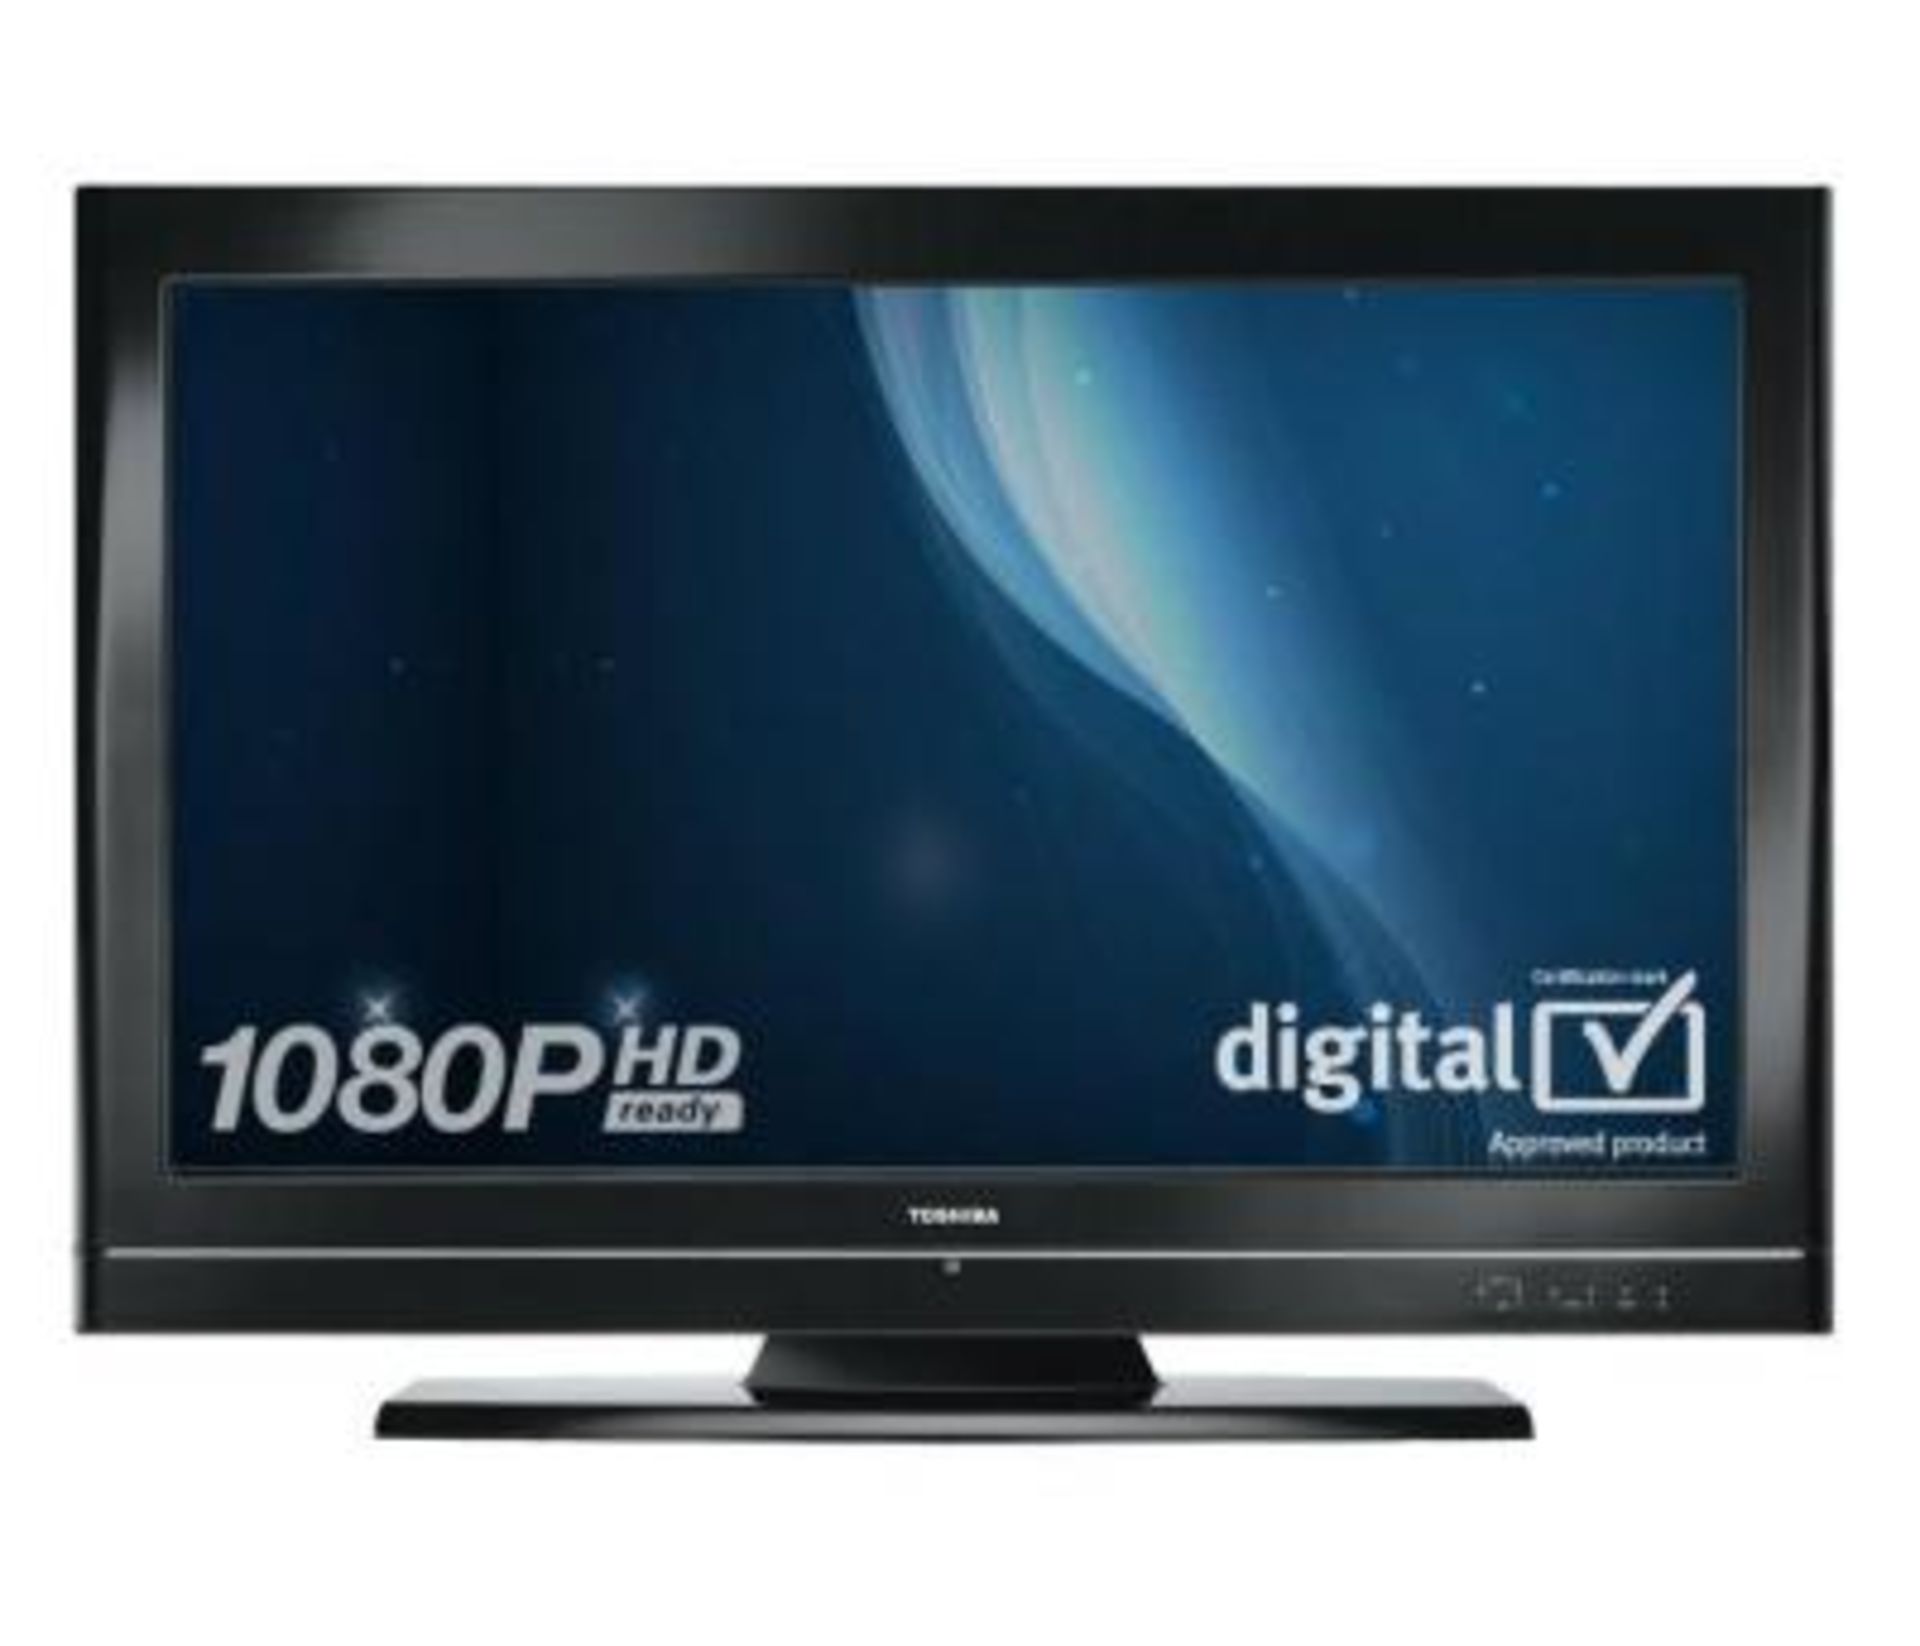 TOSHIBA 40BV701 40" HD LCD TV - WITH REMOTE, STAND & MAINS LEAD / GRADE: REFURBISHED (TV2) [D7]